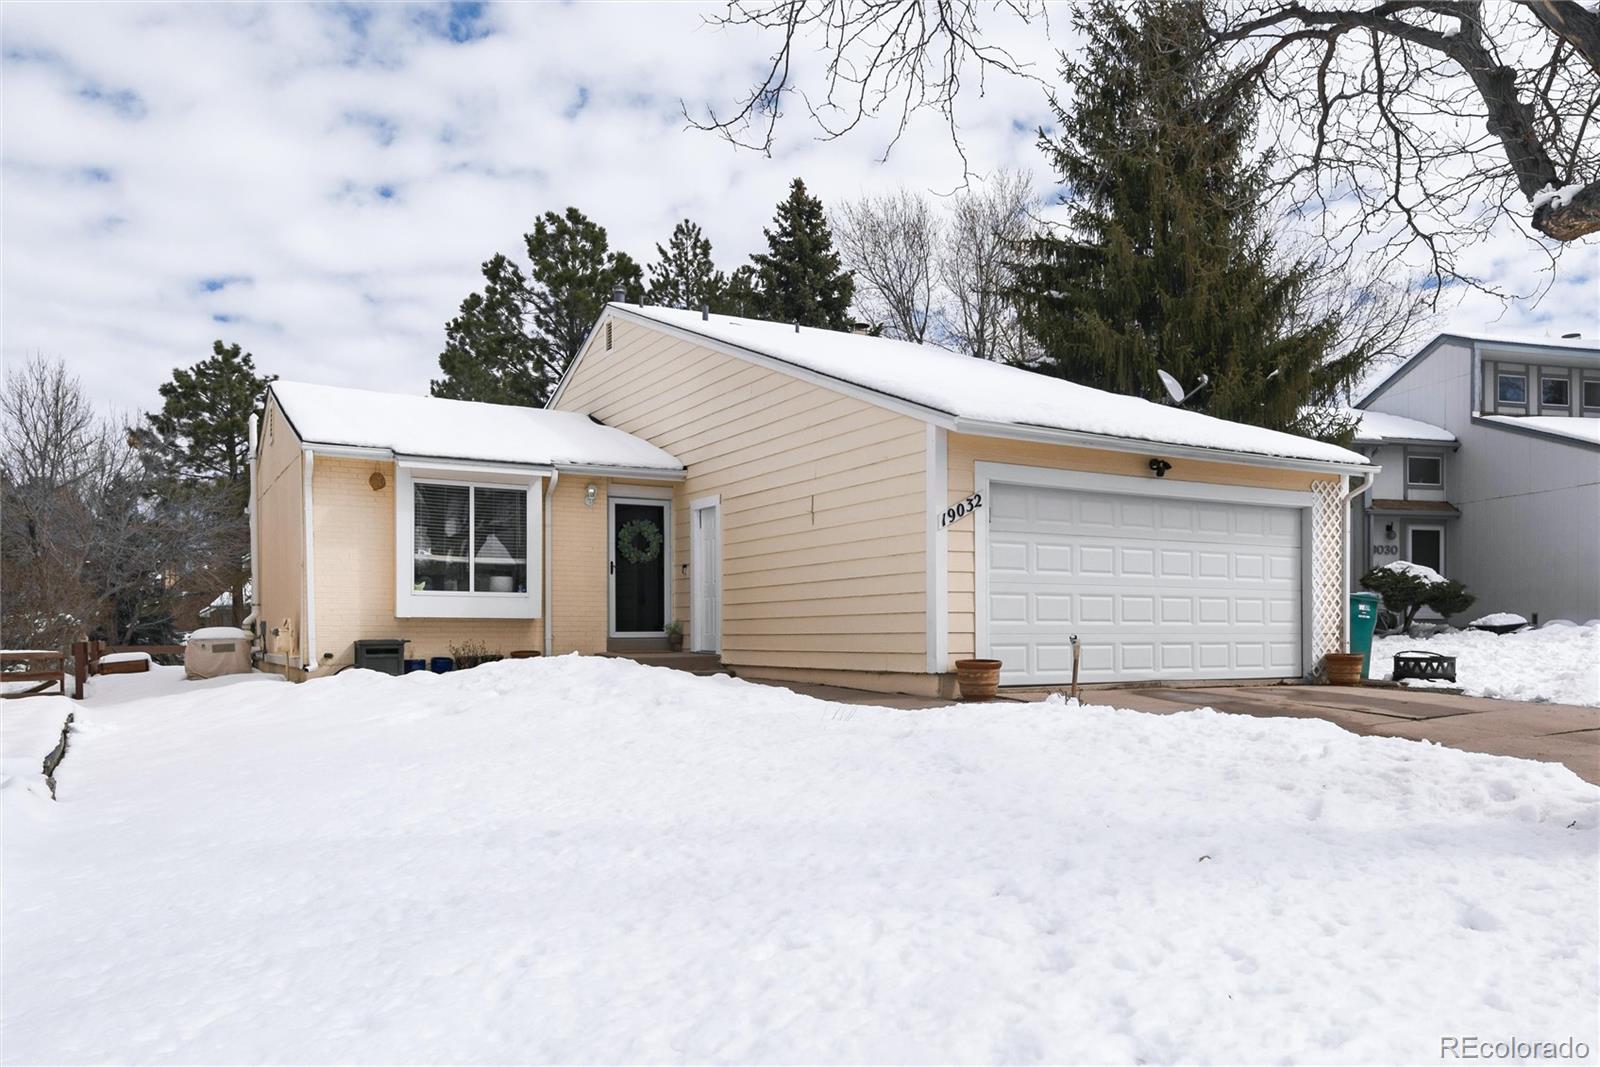 19032 e mansfield drive, aurora sold home. Closed on 2024-04-25 for $499,000.